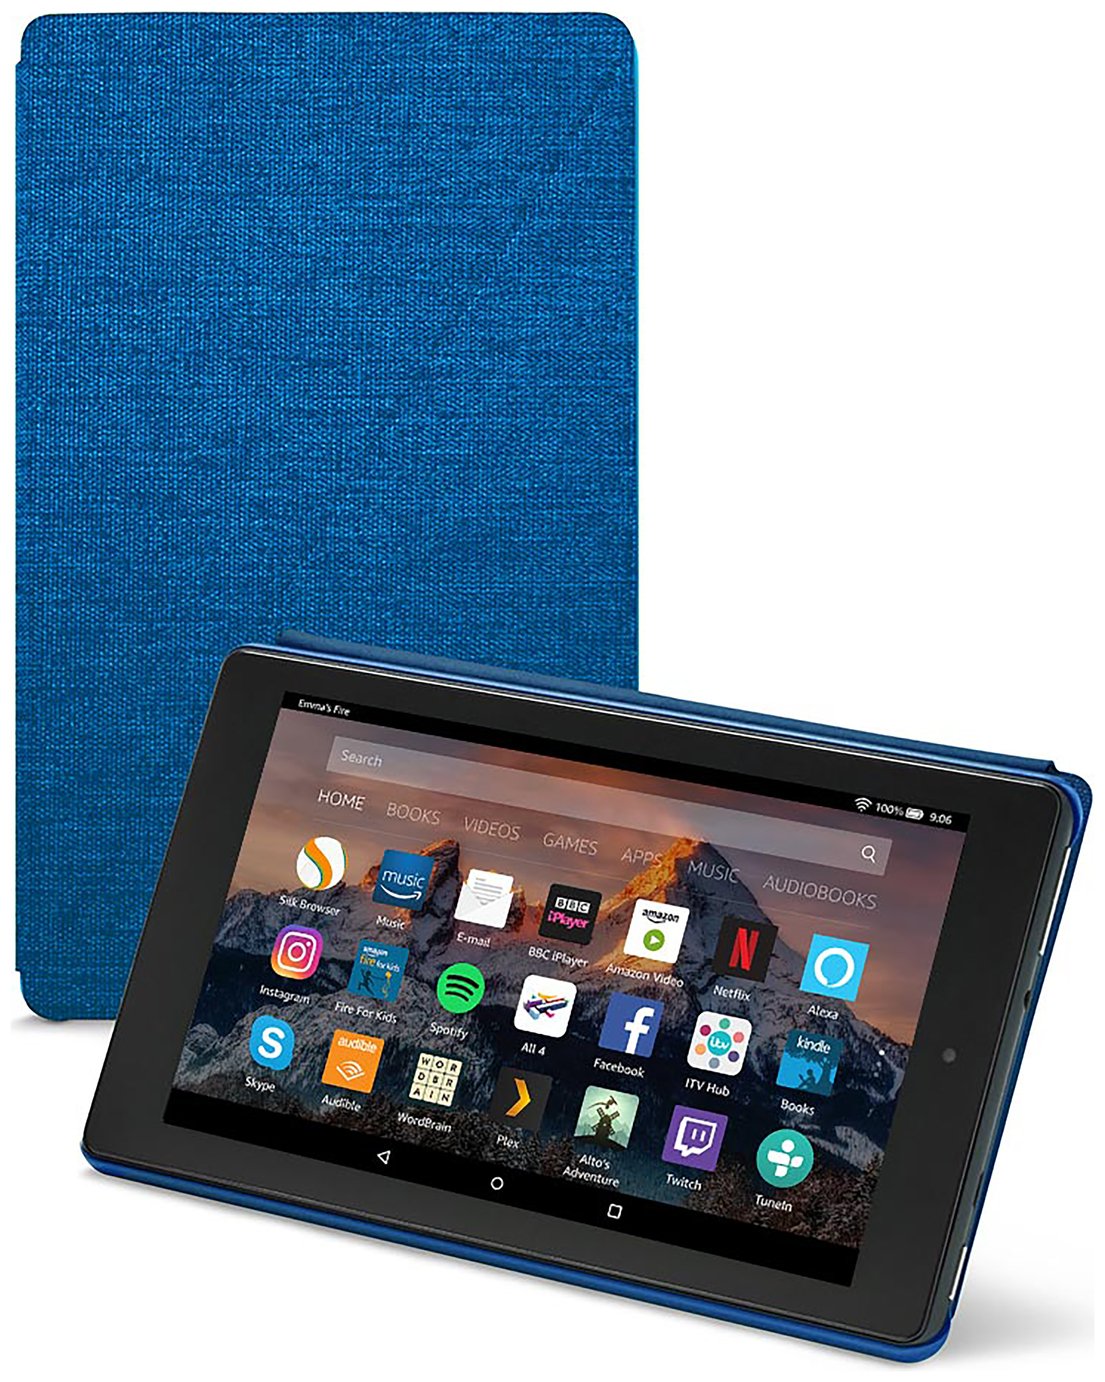 Amazon Fire HD 8 2017 Tablet Case Review